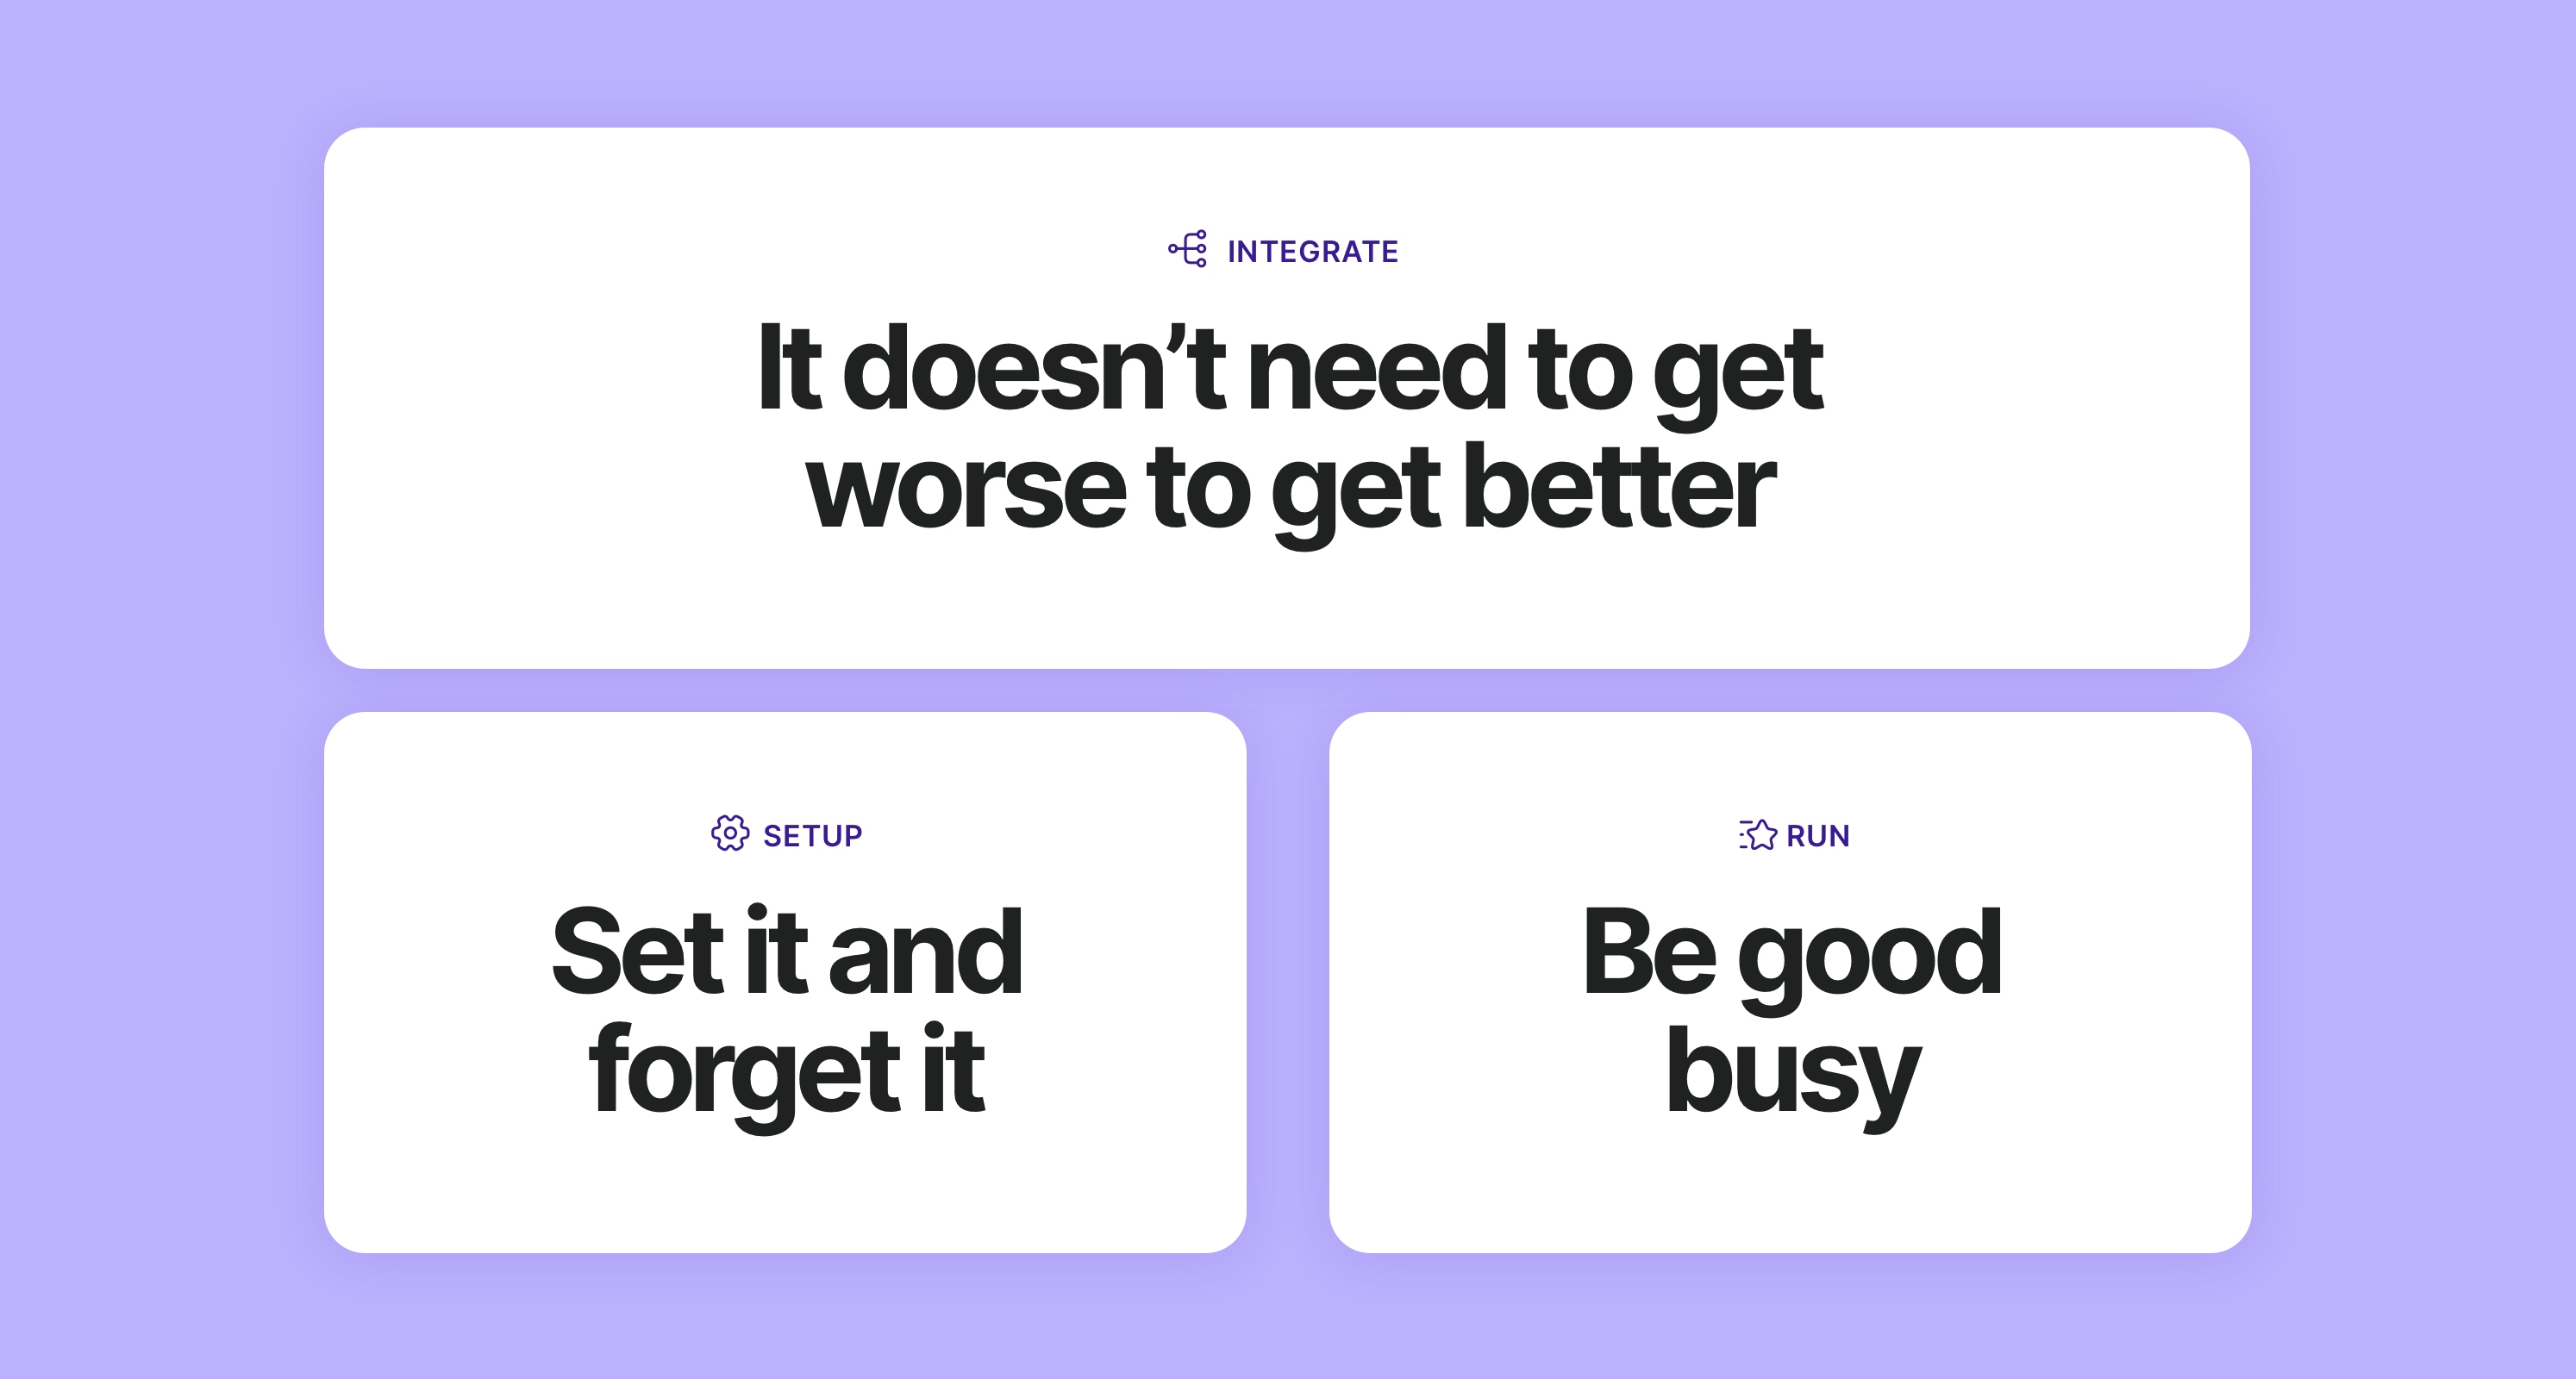 A lilac screen with a long row stating “INTEGRATE It doesn't need to get worse to get better”Underneath this two boxes state “SETUP Set it and forget it” and “RUN Be good busy”